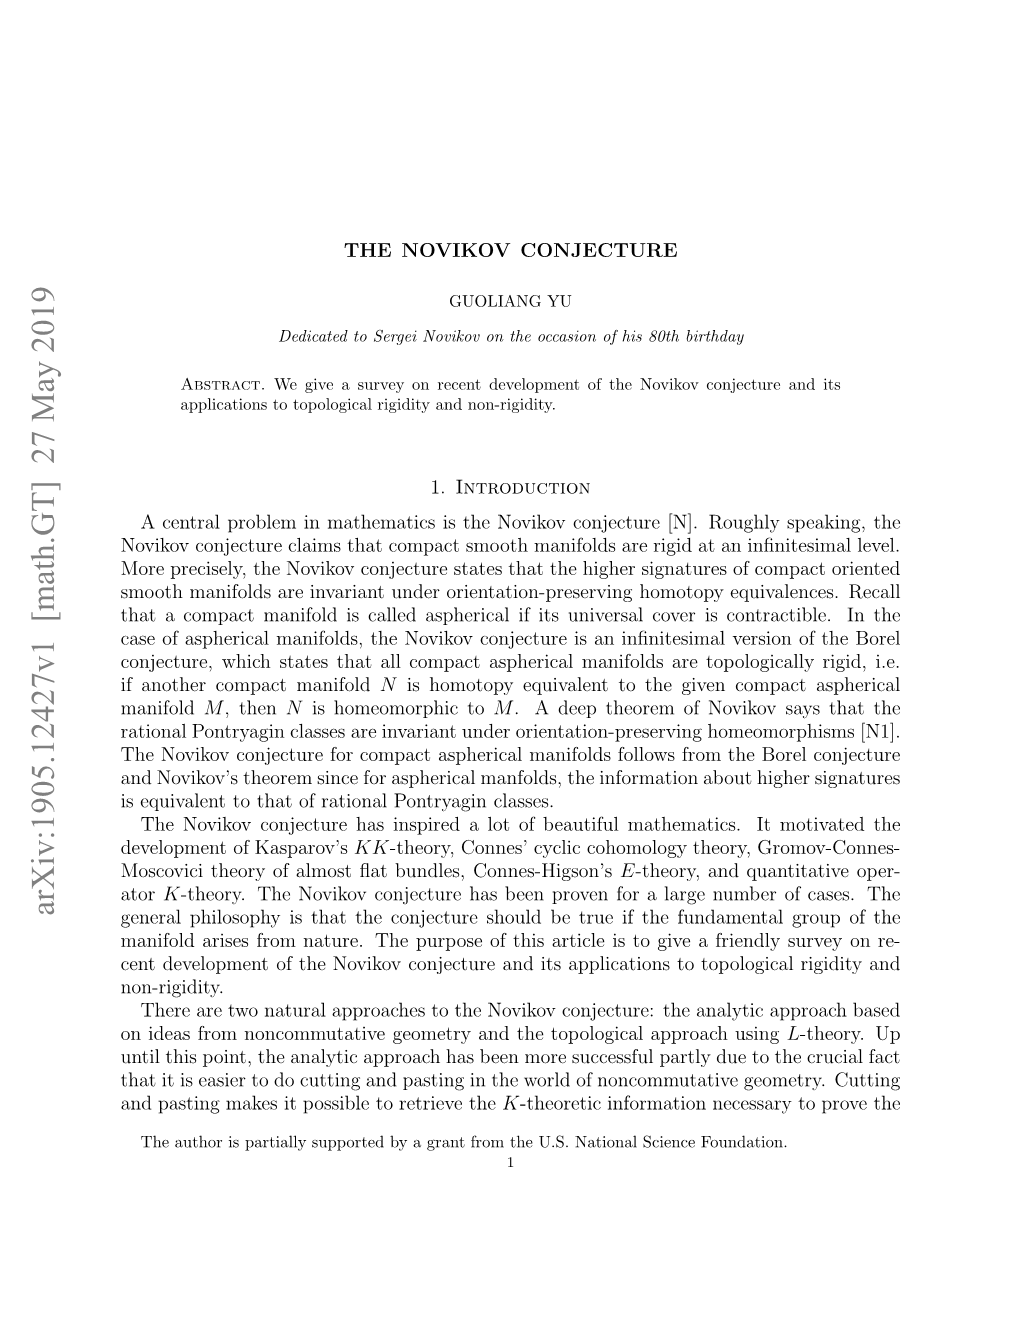 The Novikov Conjecture and As Well As Methods Inspired by the Analytic Approach